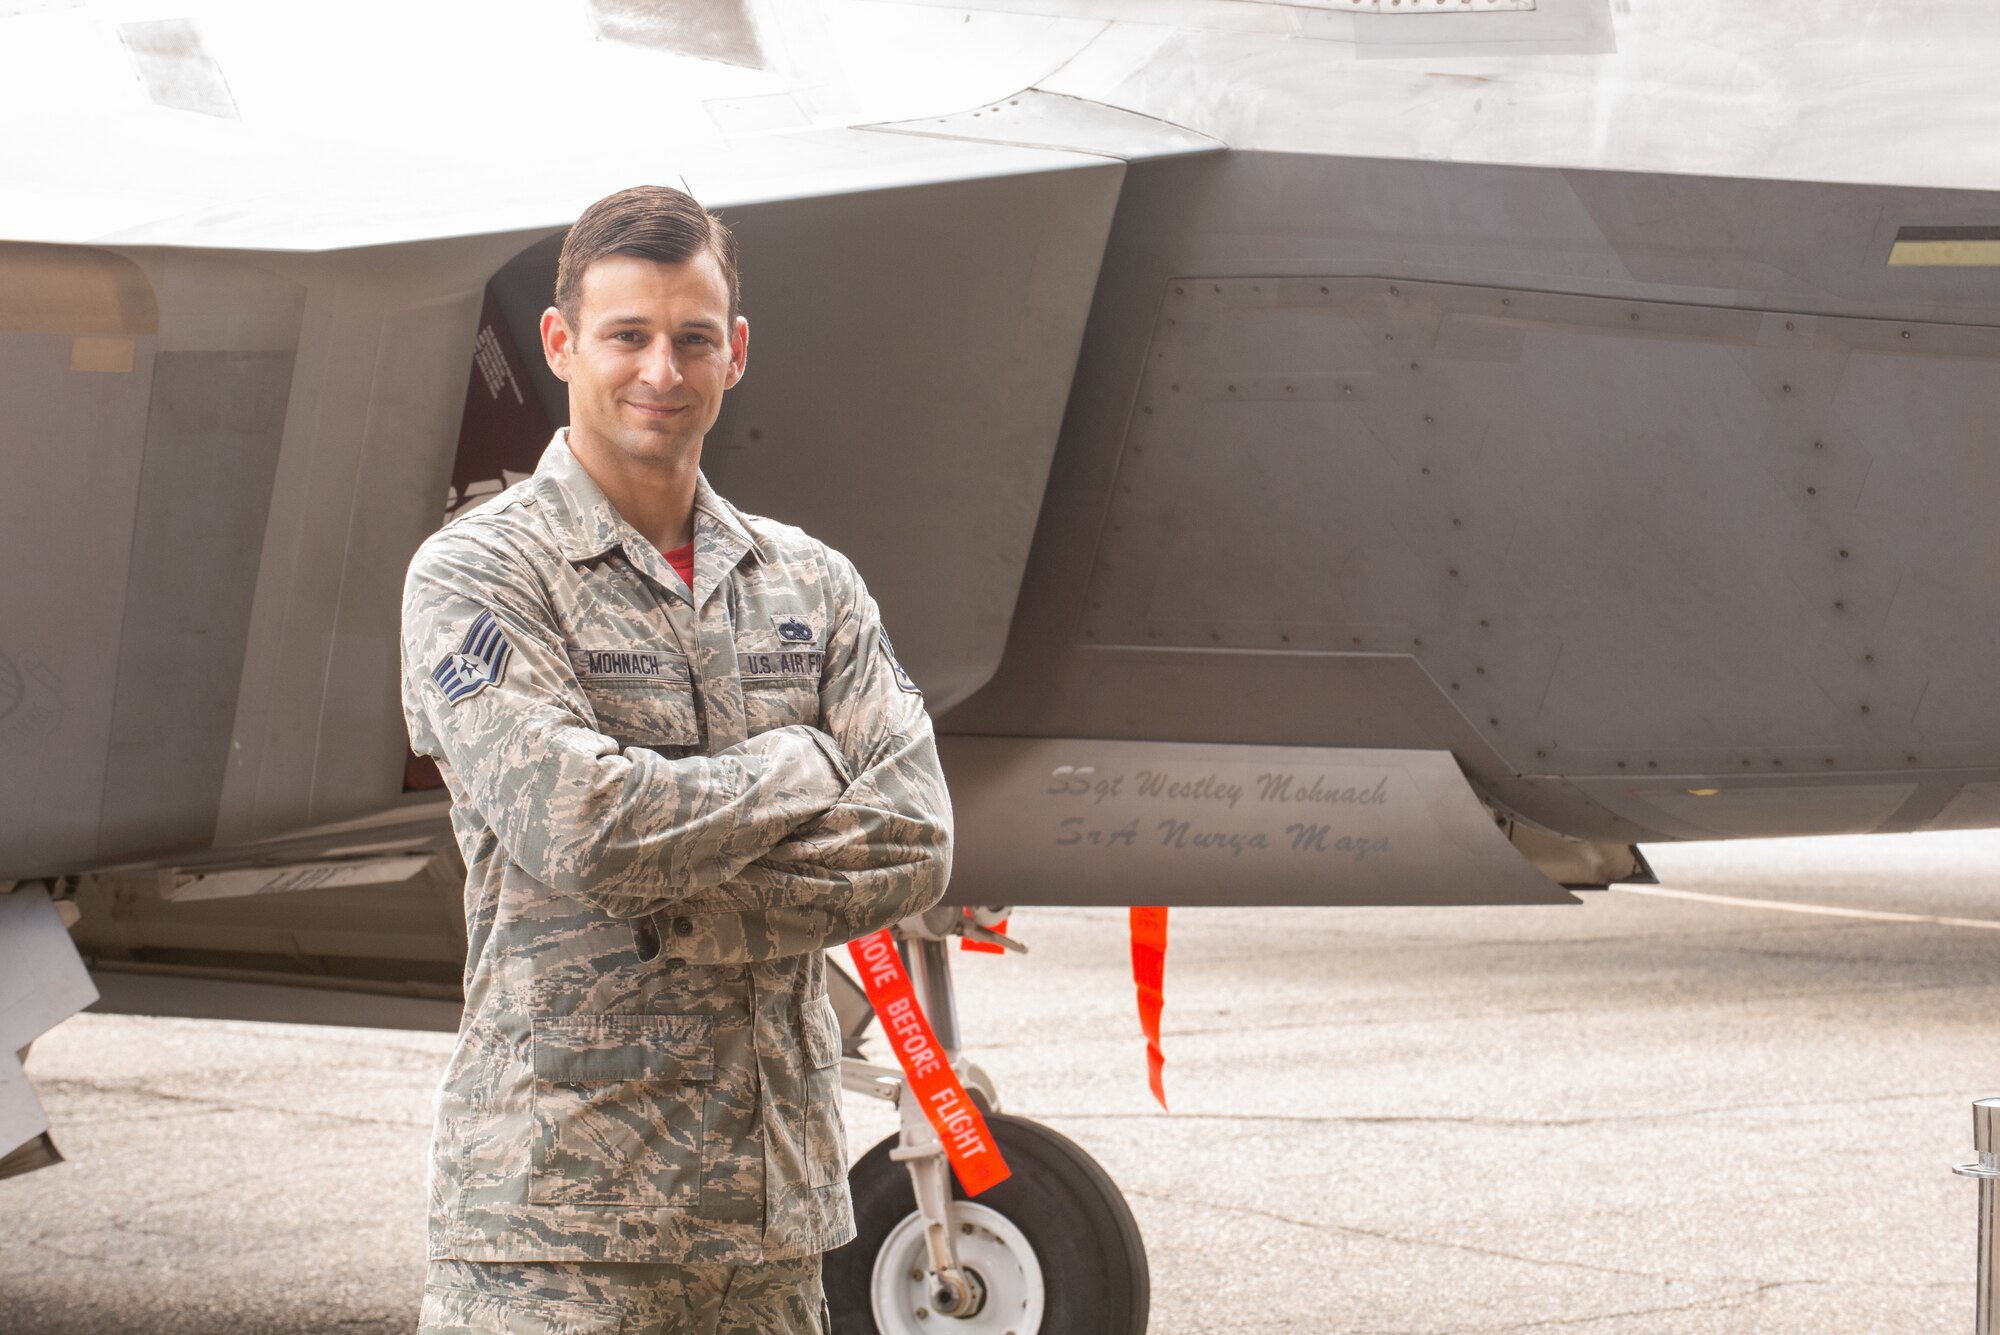 Dedicated crew chief Airman standing in front of an F-22 Raptor